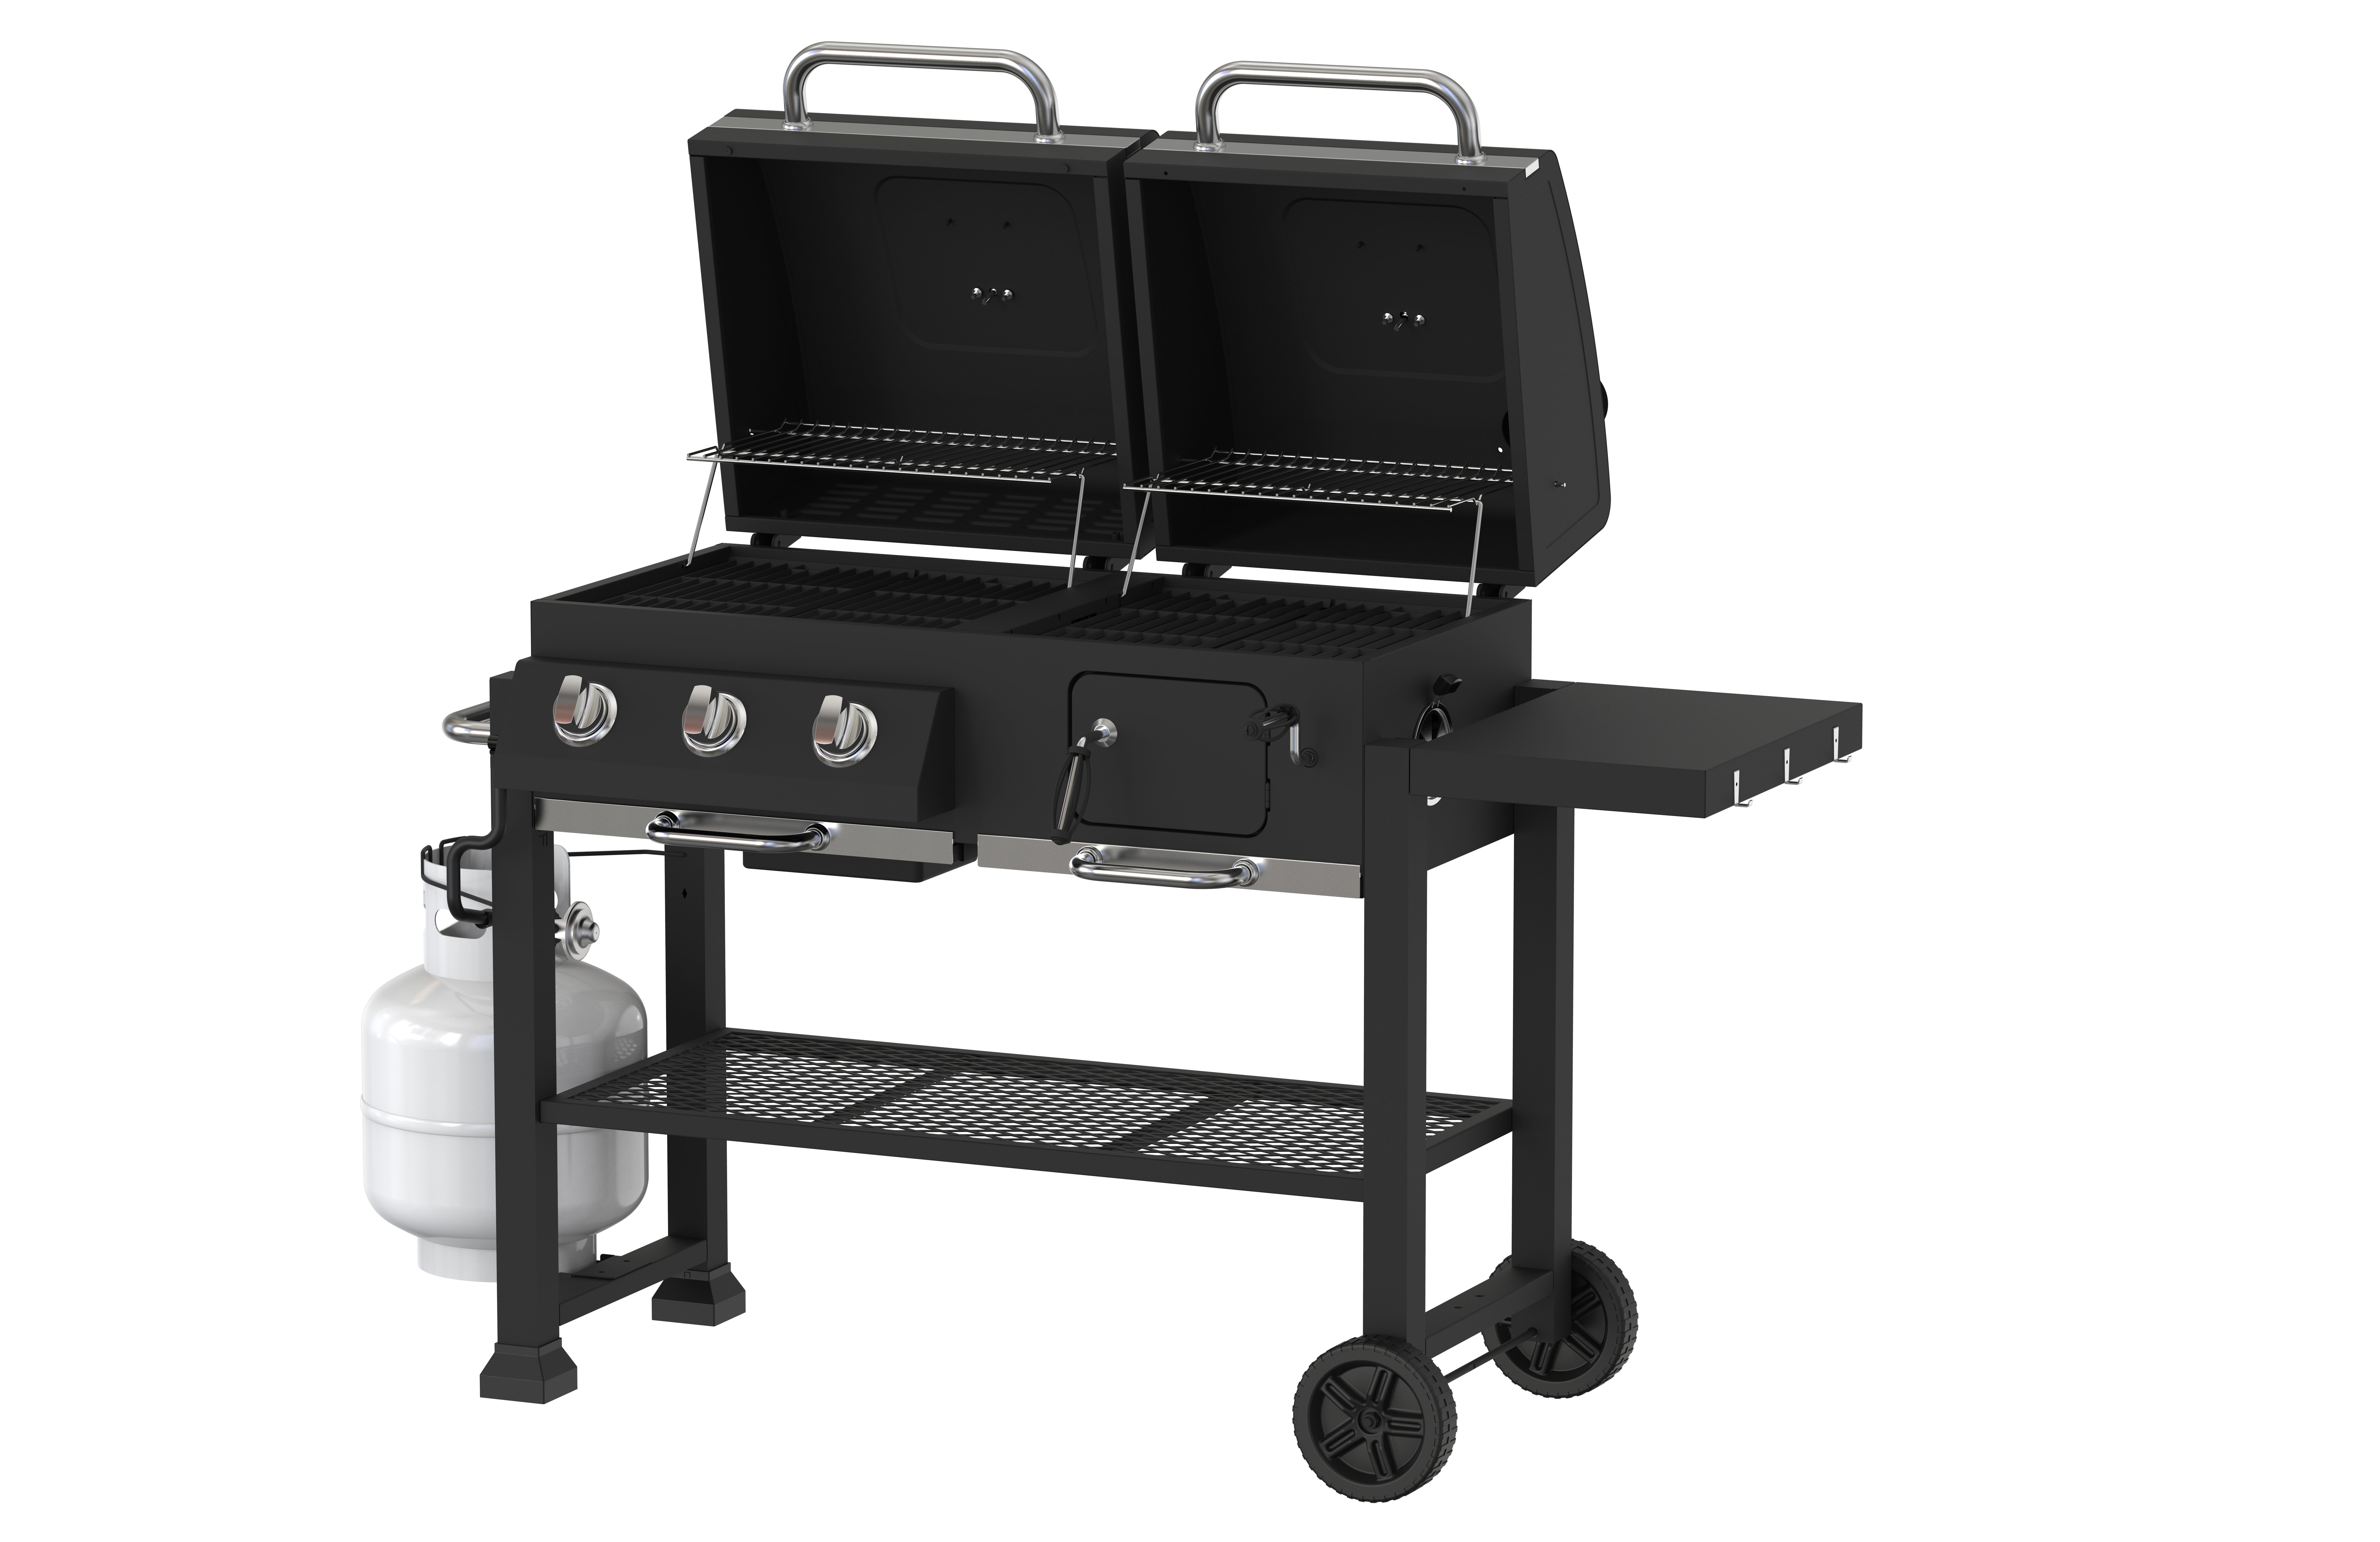 Expert Grill 3 Burner Gas and Charcoal Combo Grill - image 3 of 12